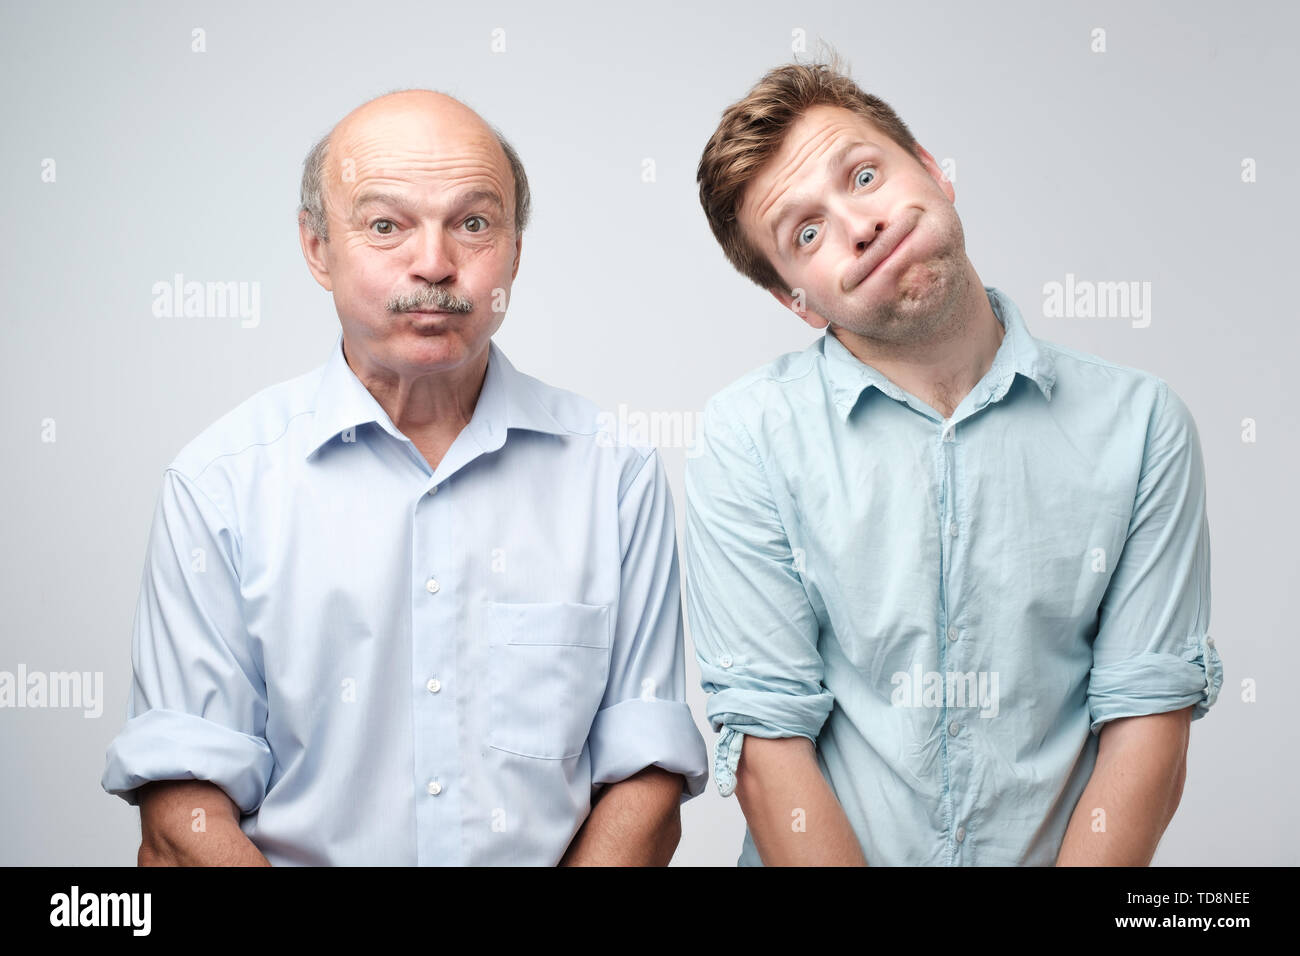 Two men grimacing, inflating cheeks, holding breath Stock Photo